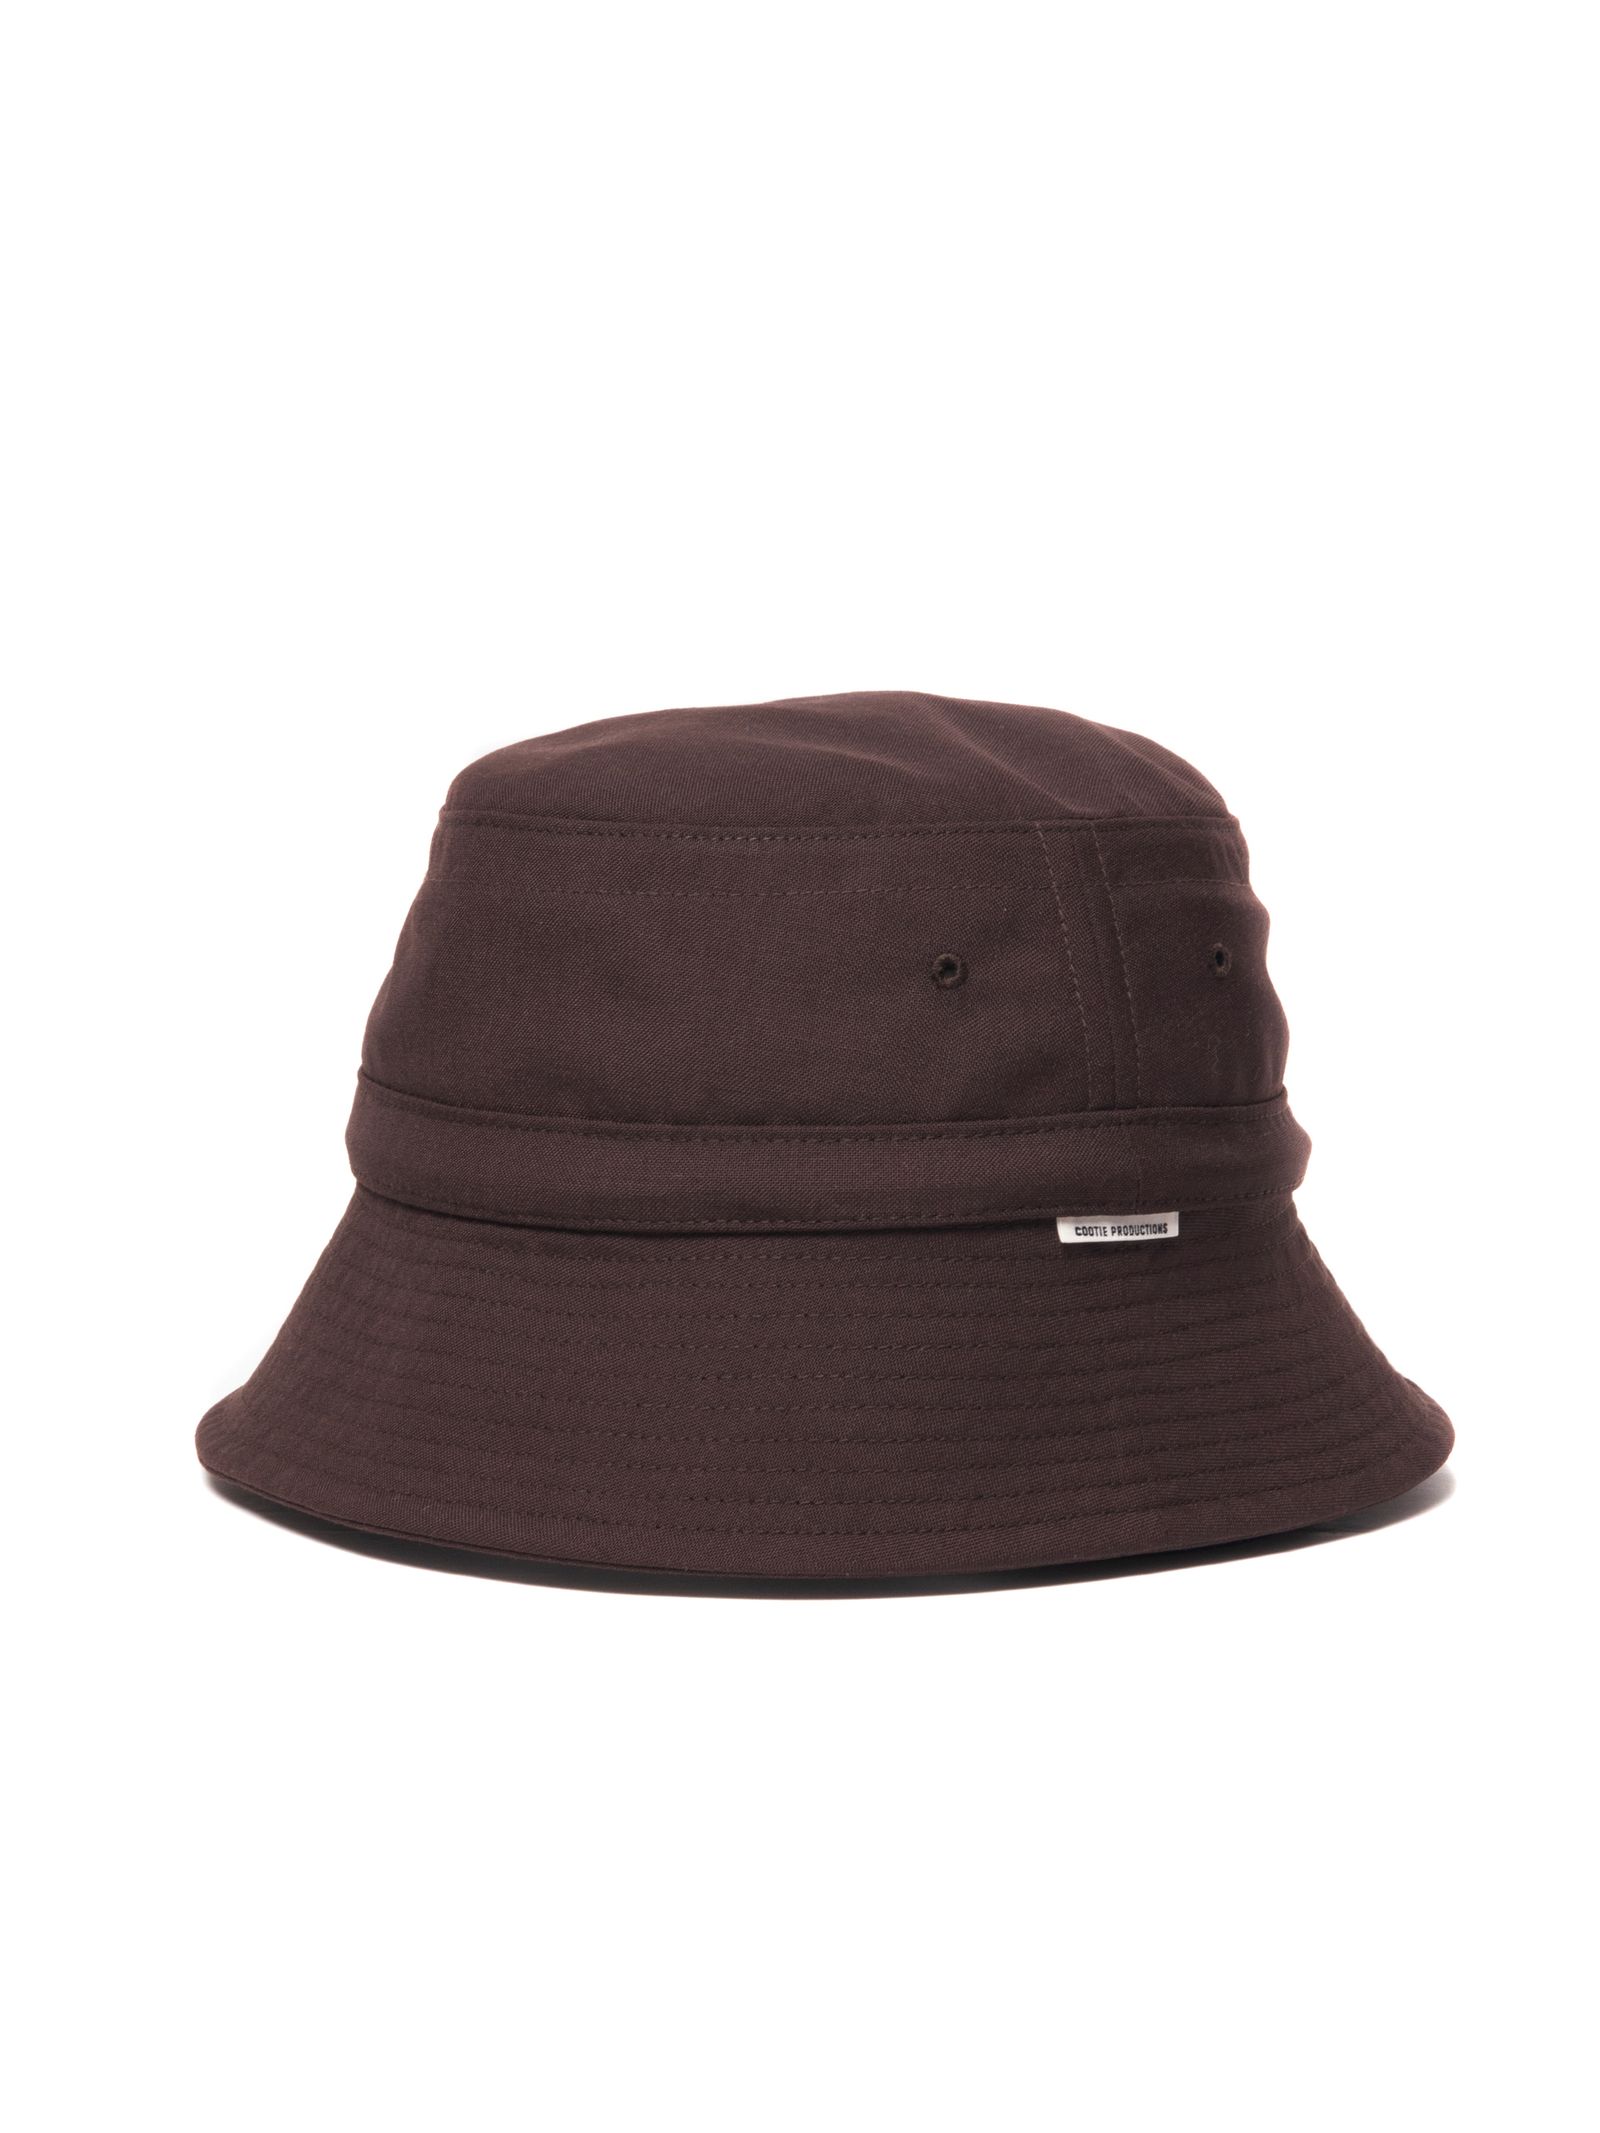 COOTIE PRODUCTIONS - 【ラスト1点】T/W BUCKET HAT (BROWN